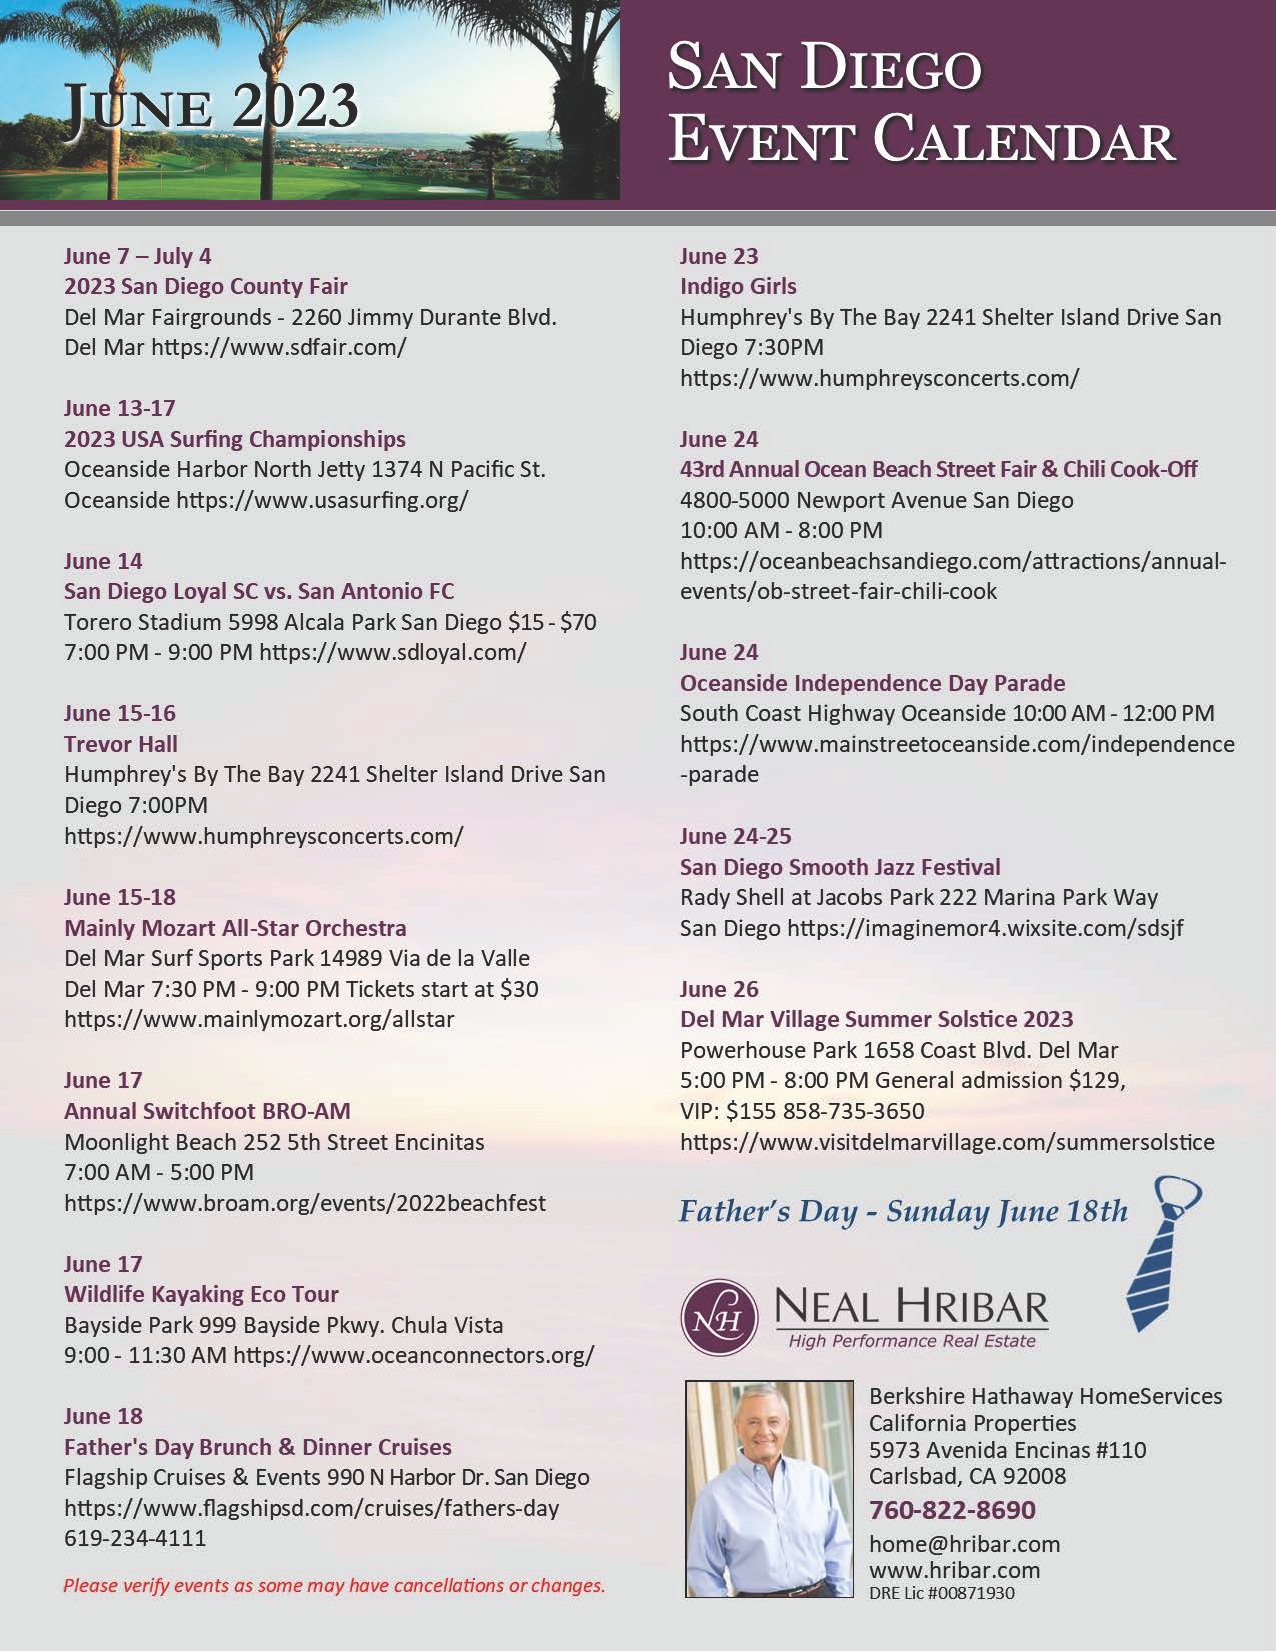 San Diego Activities and Events Calendar